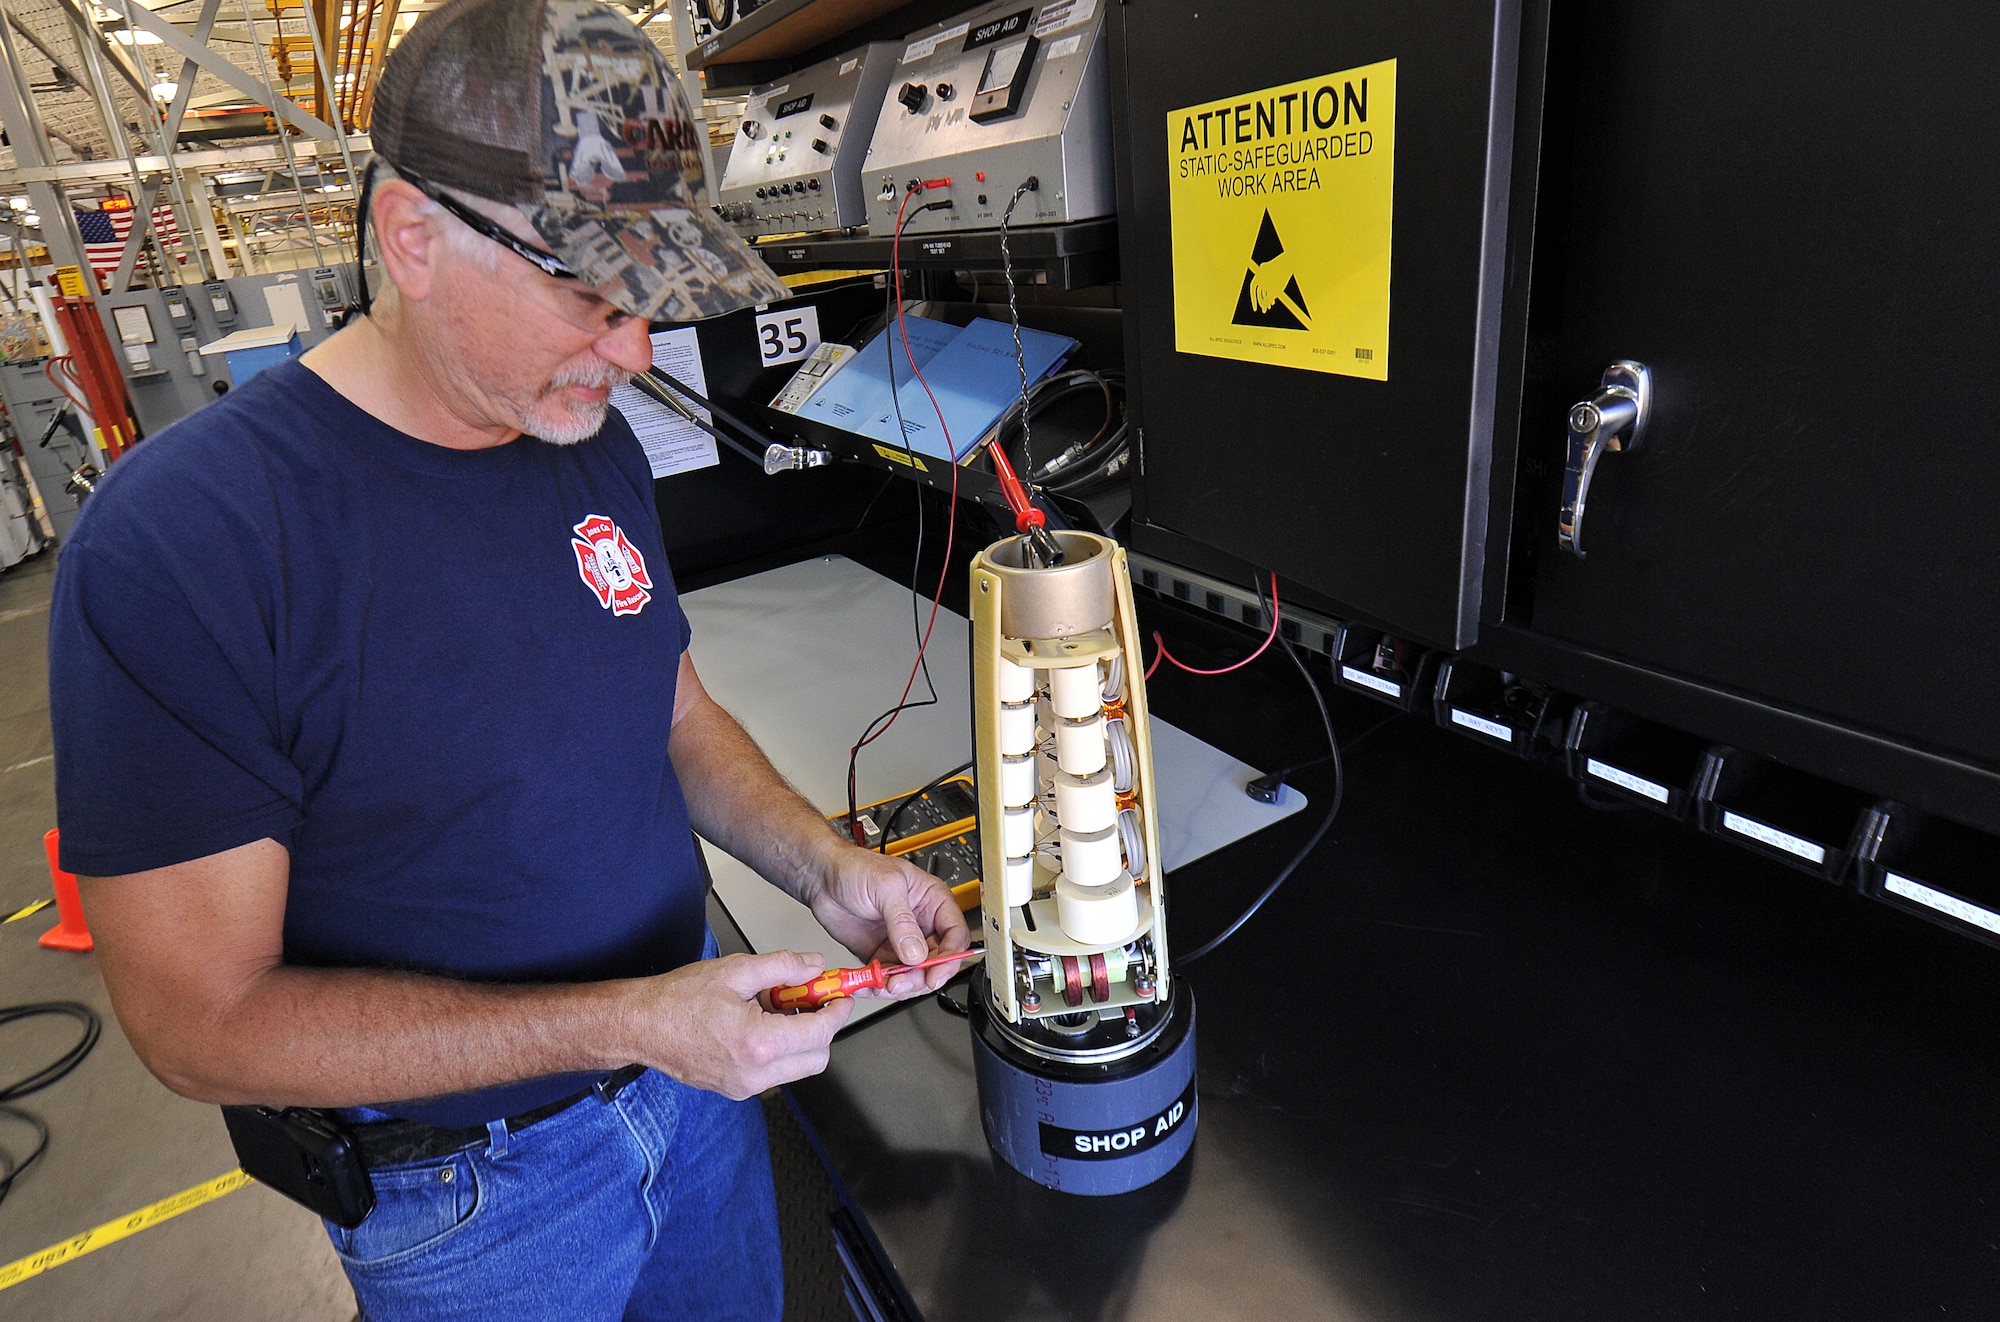 Karl Zimmer, 402nd Maintenance Support Group Electronic Industrial Control mechanic, measures the output of a high voltage assembly to be used in X-Ray equipment which will conduct testing inspections on vital assets. (U.S. Air Force photo by Tommie Horton)
